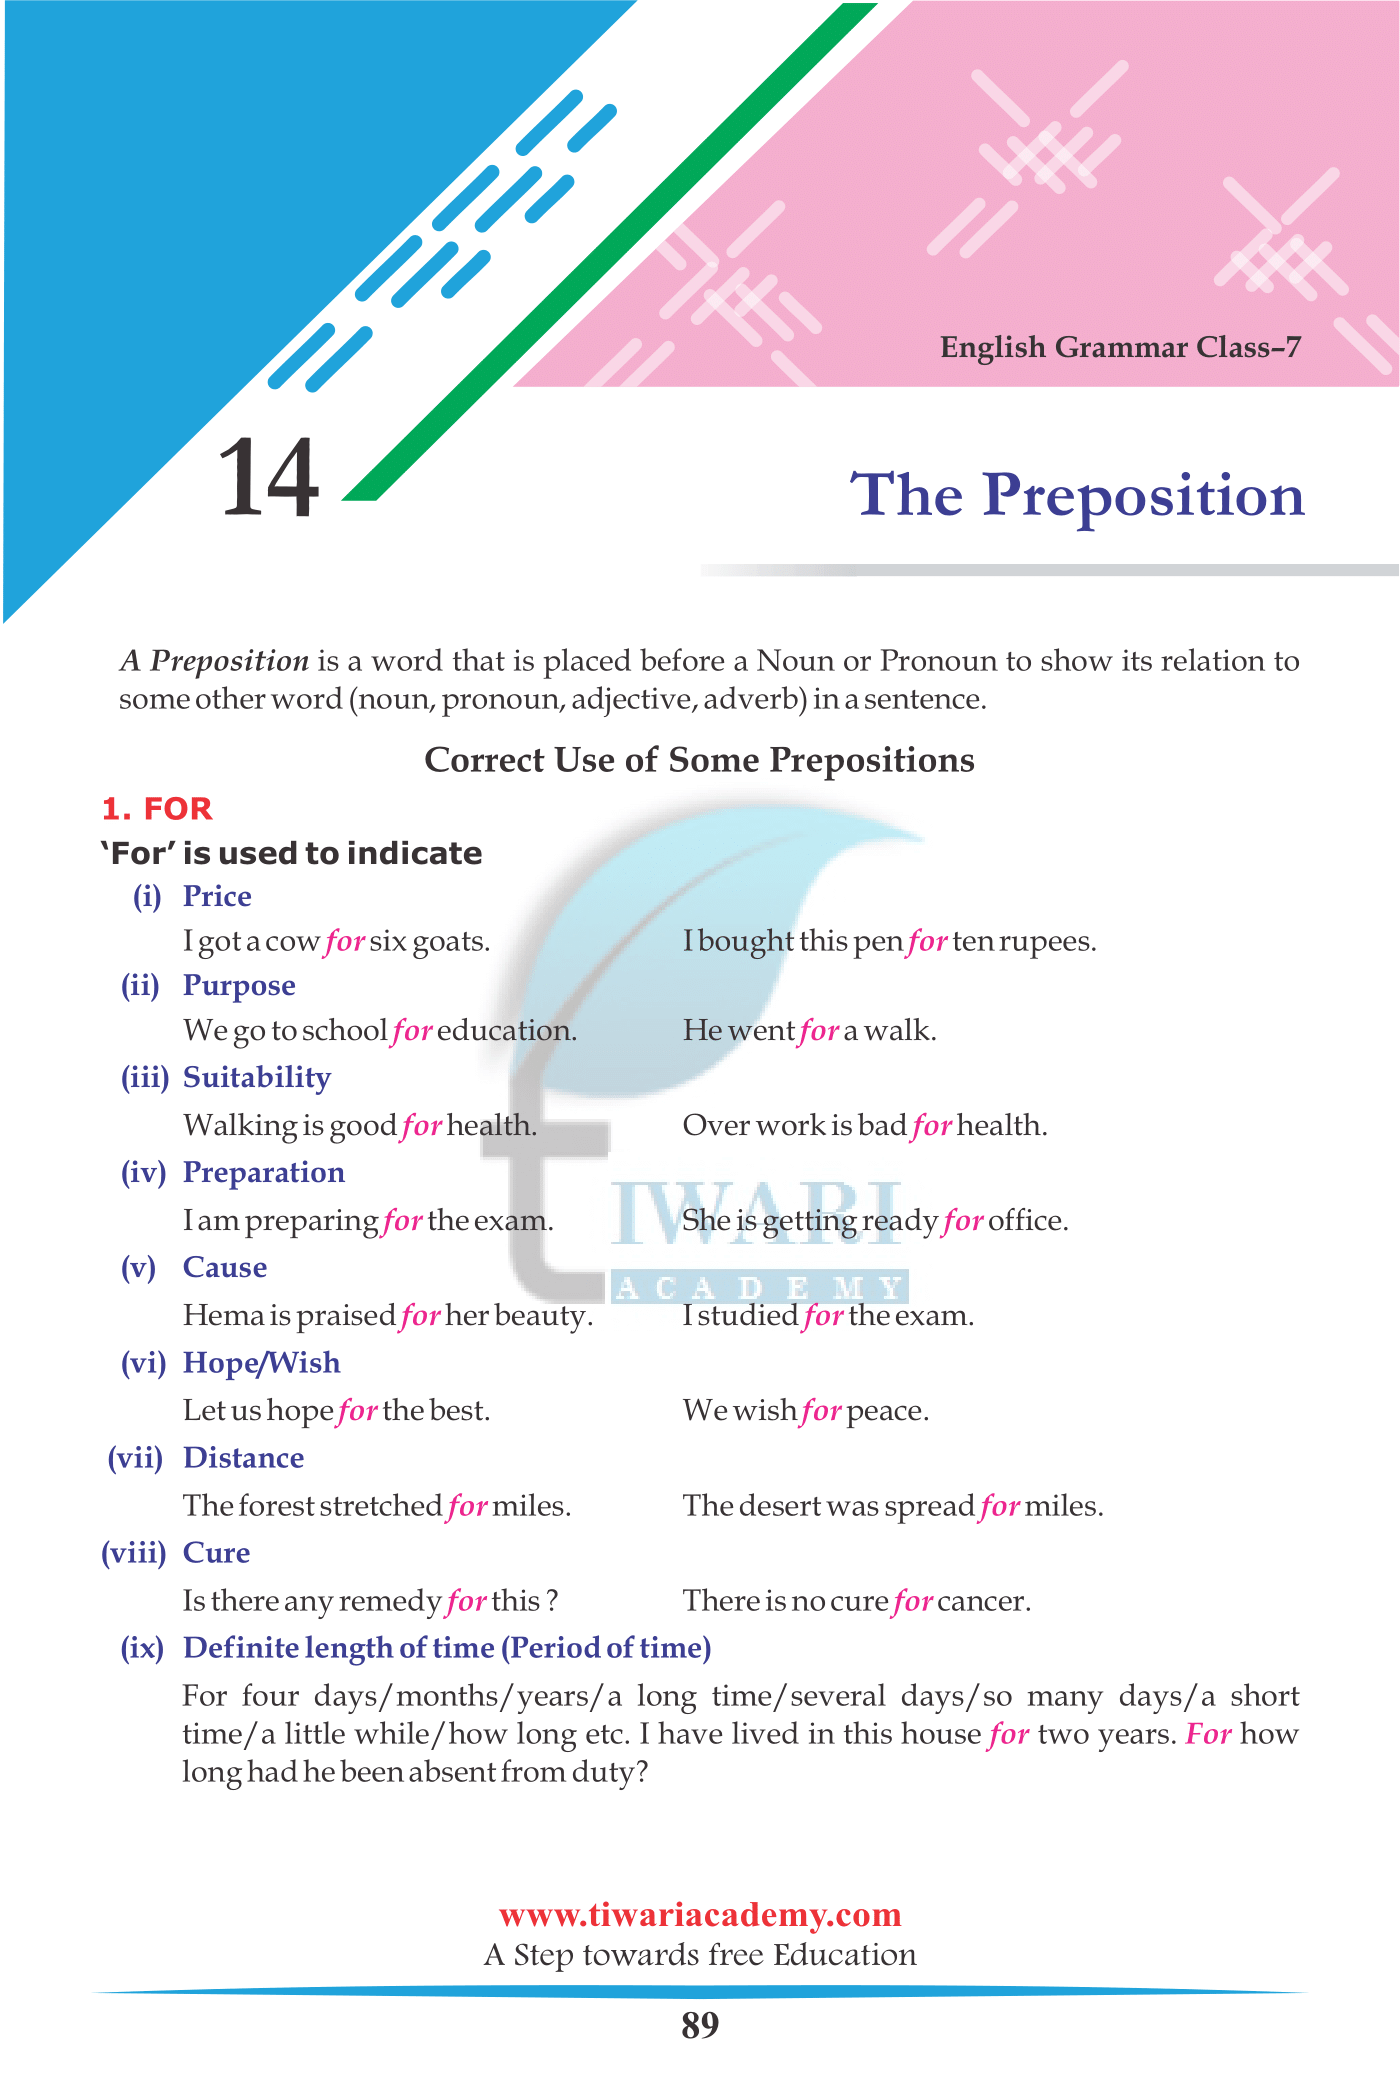 Class 7 English Grammar Chapter 14 The Preposition for session 2022-2023